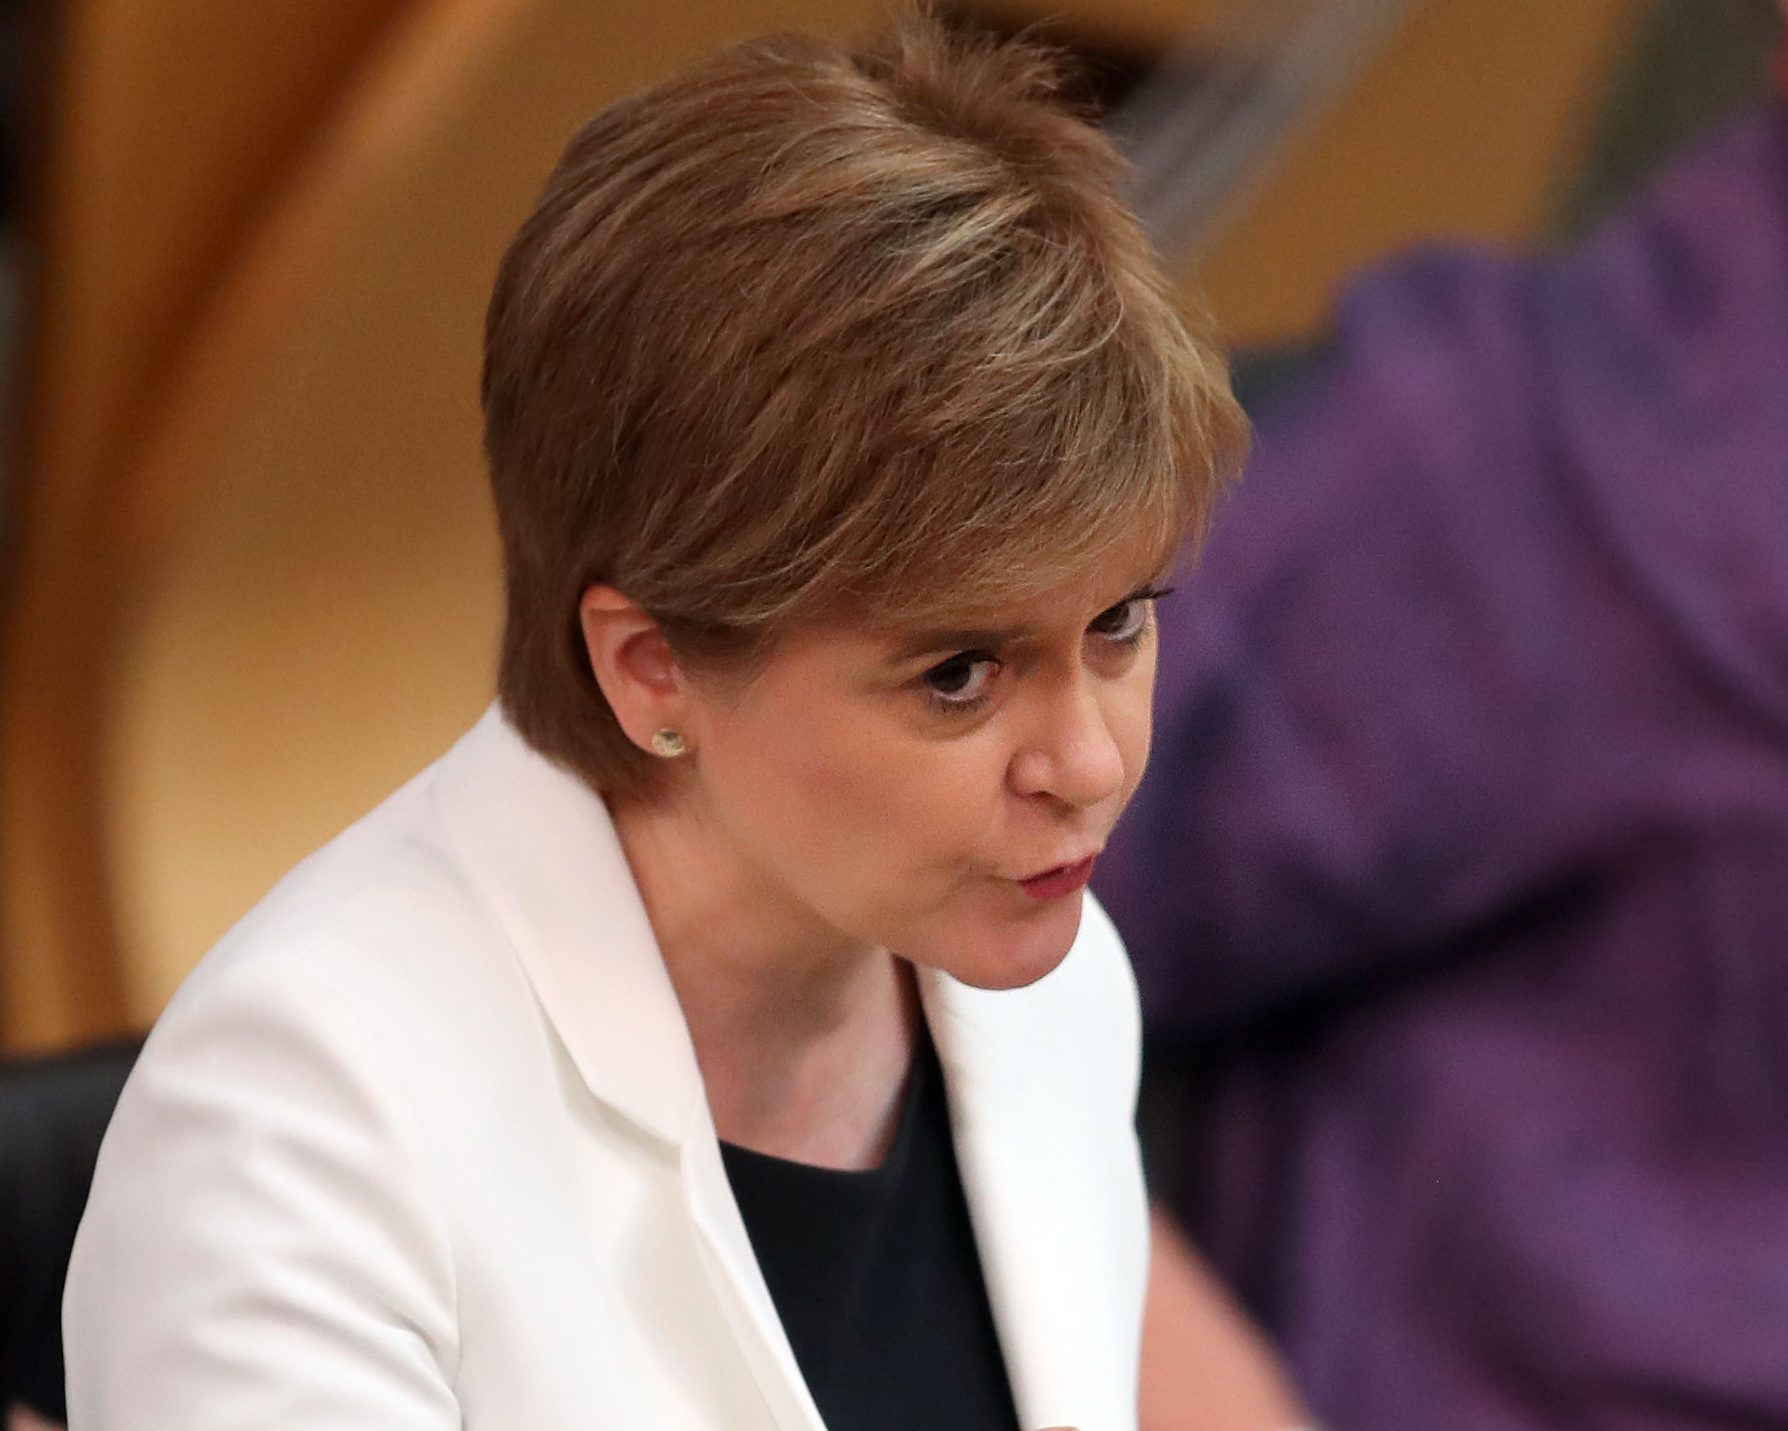 First Minister Nicola Sturgeon during First Minister's Questions at the Scottish Parliament in Edinburgh. (Jane Barlow/PA Wire)